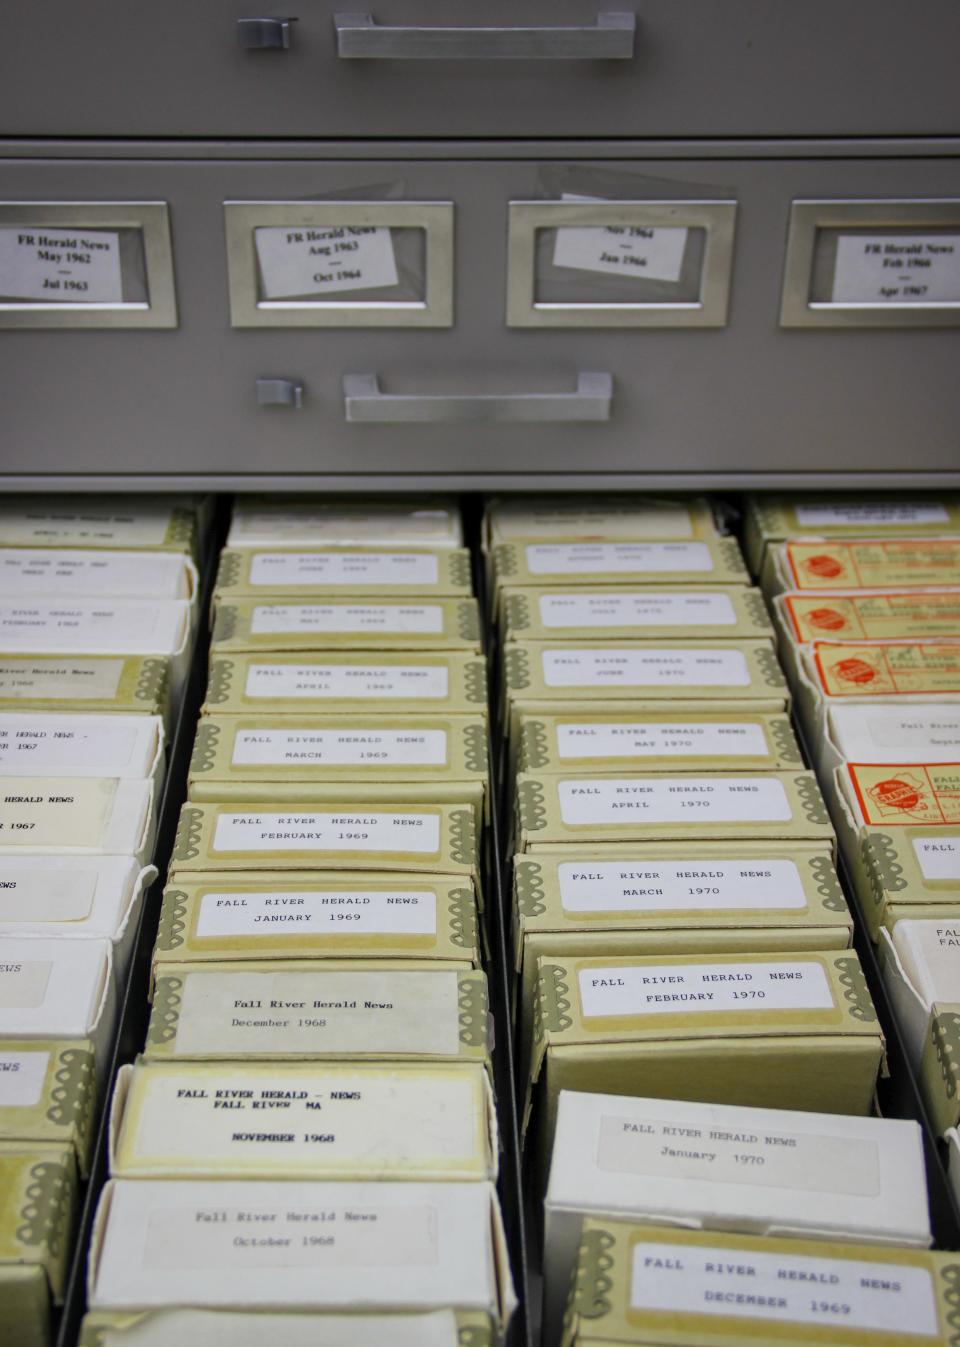 The Fall River Public Library has made significant headway in its effort to digitize decades worth of local newspapers on microfilm, including The Herald News until 1968.